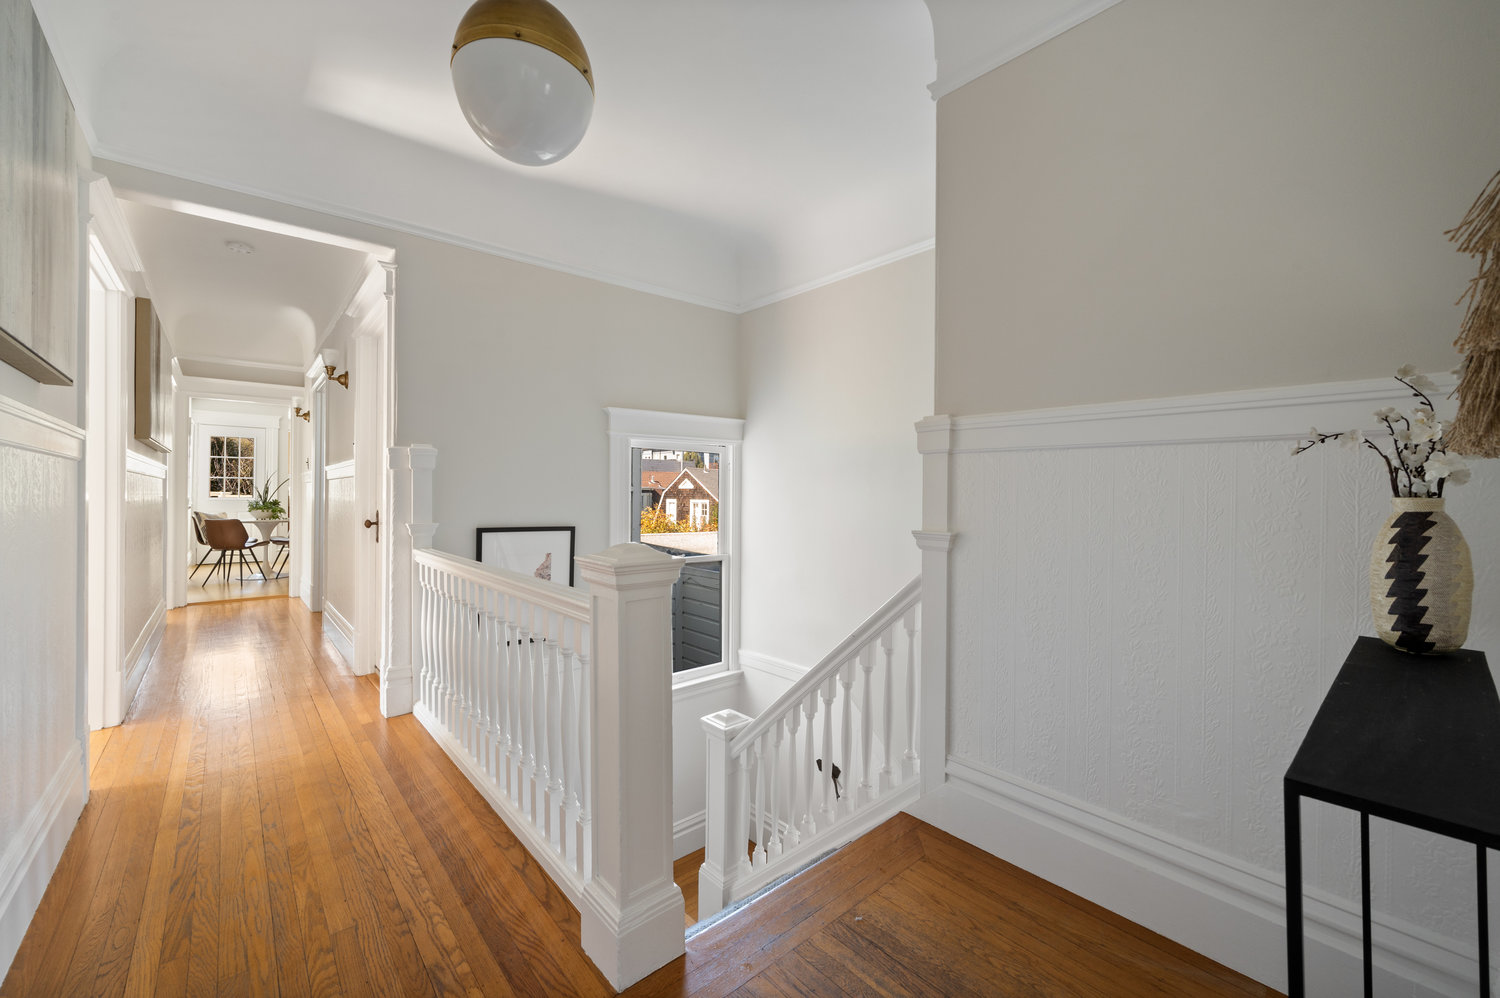 Property Photo: Hallway, featuring wood floors and a pretty white wood staircase leading down